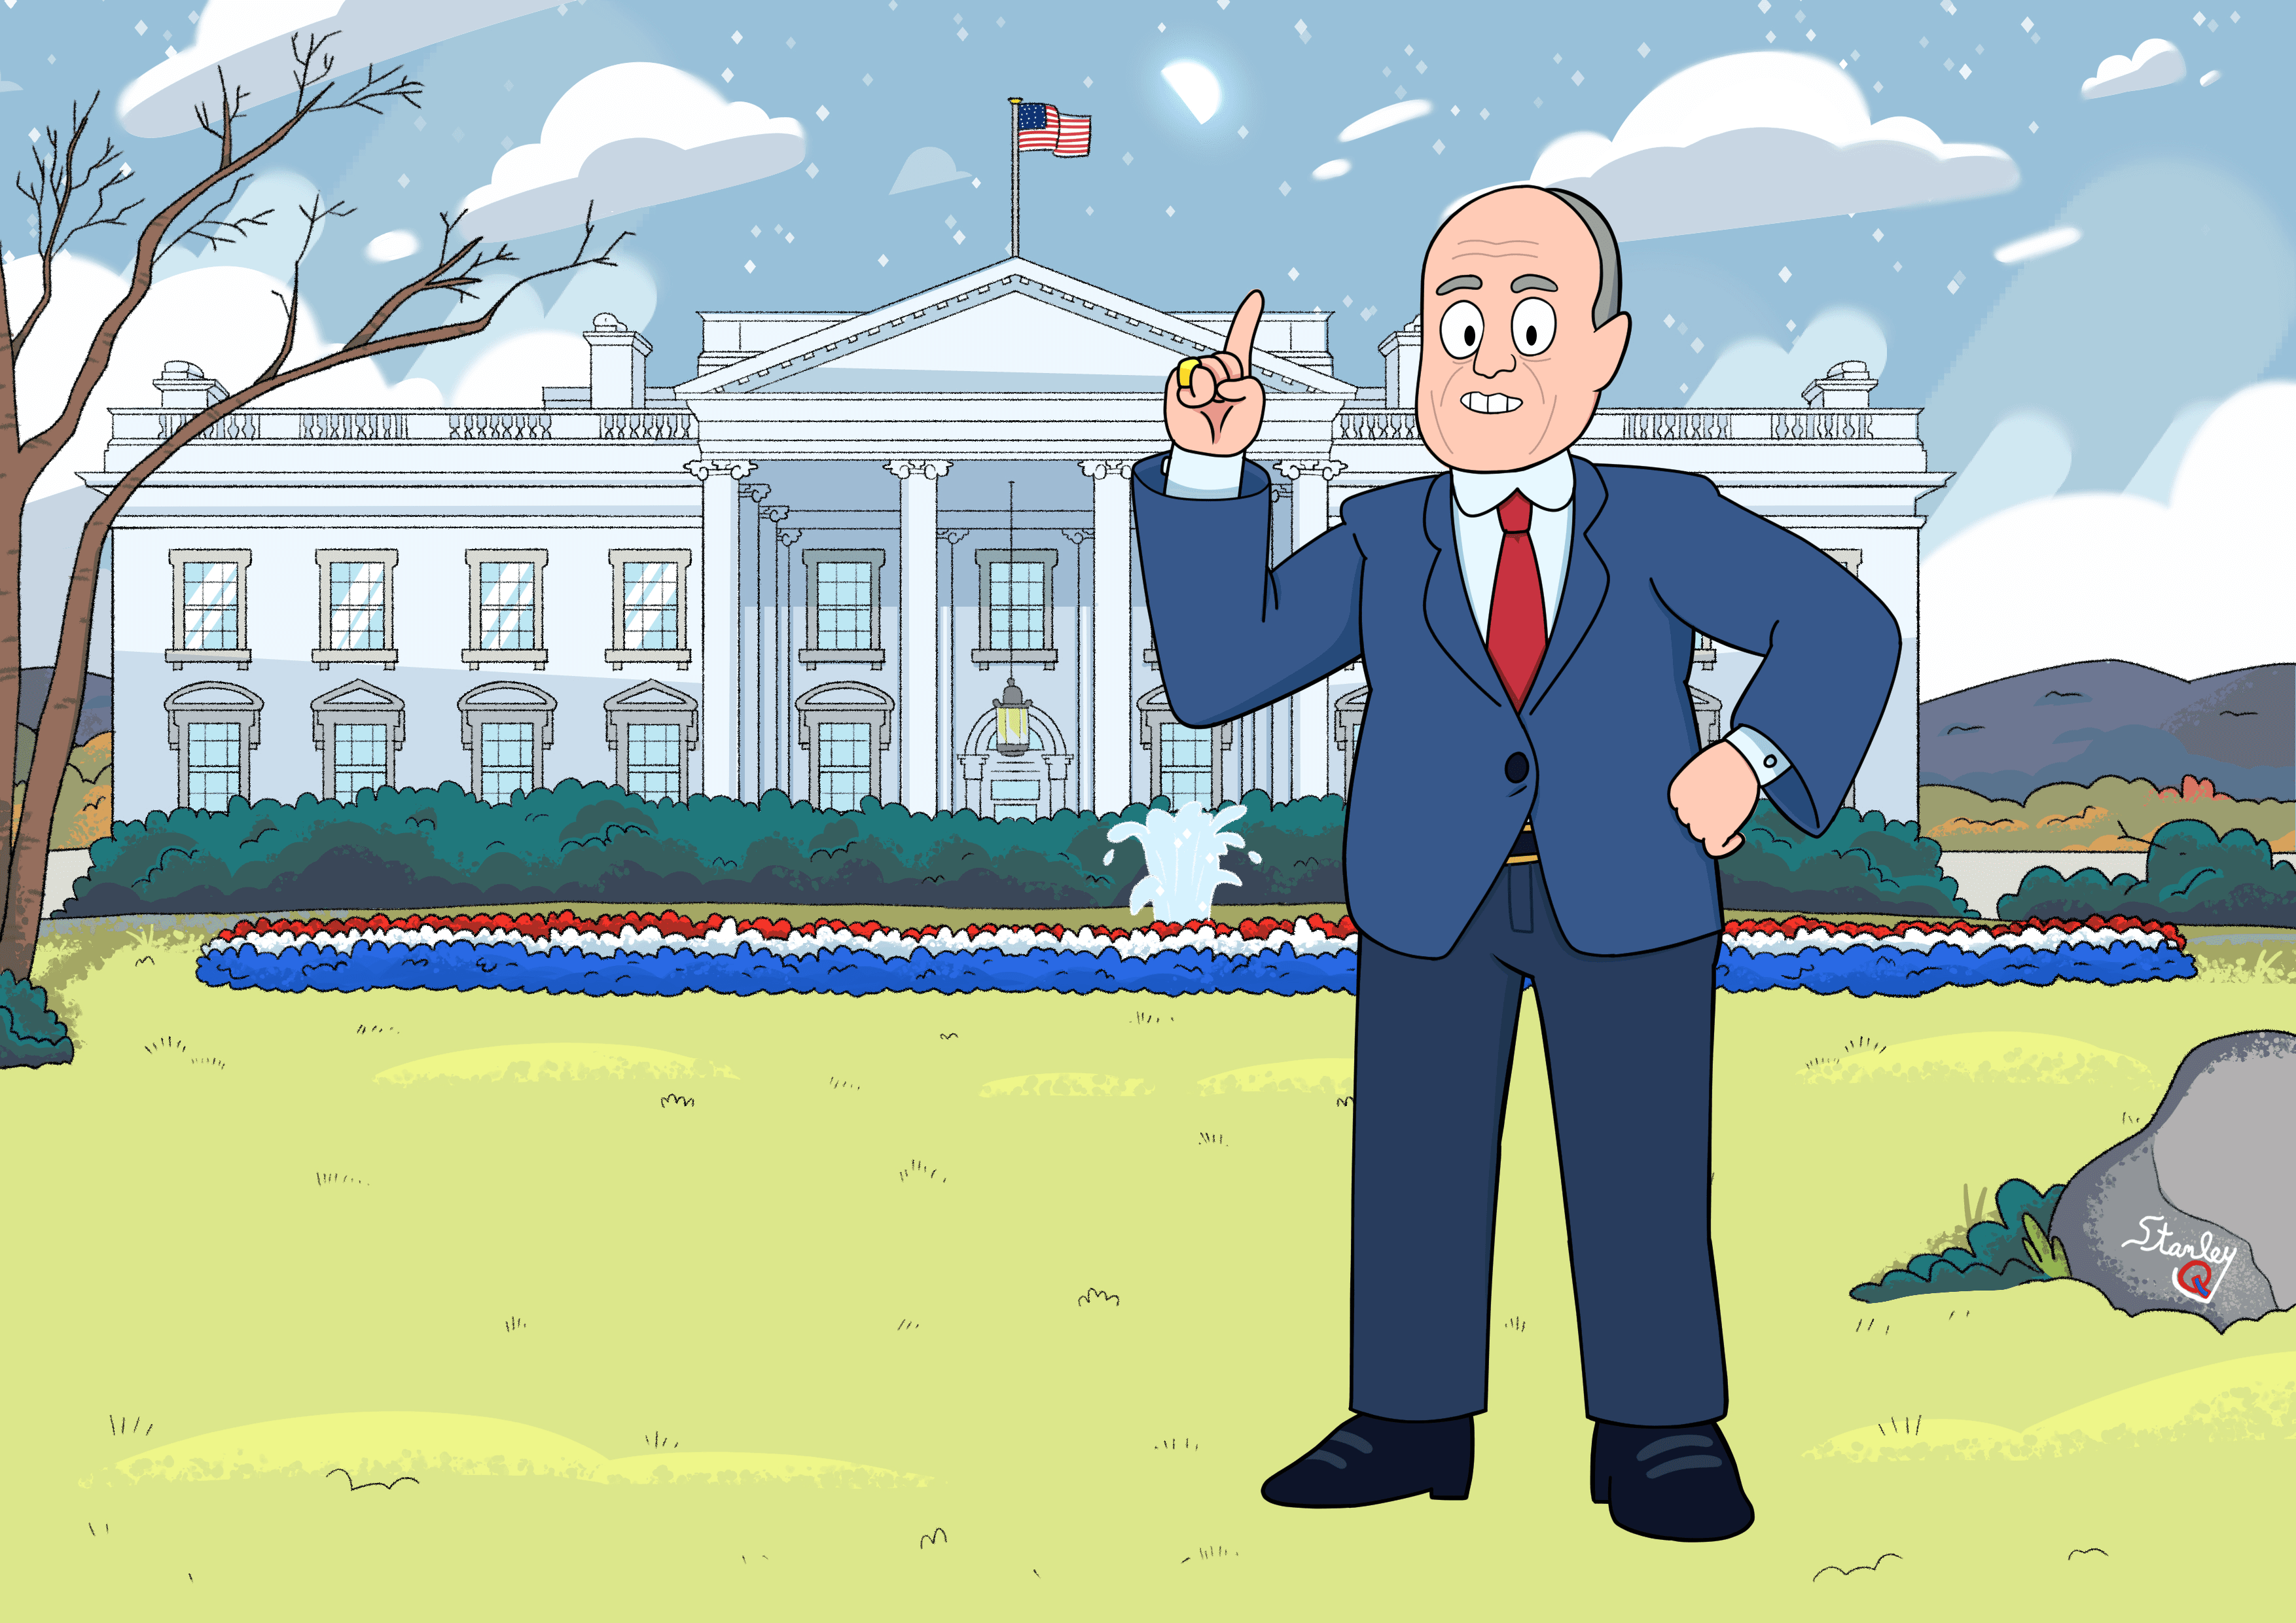 Rudy Giuliani at WhiteHouse in Style of Steven Universe by StanleyQ